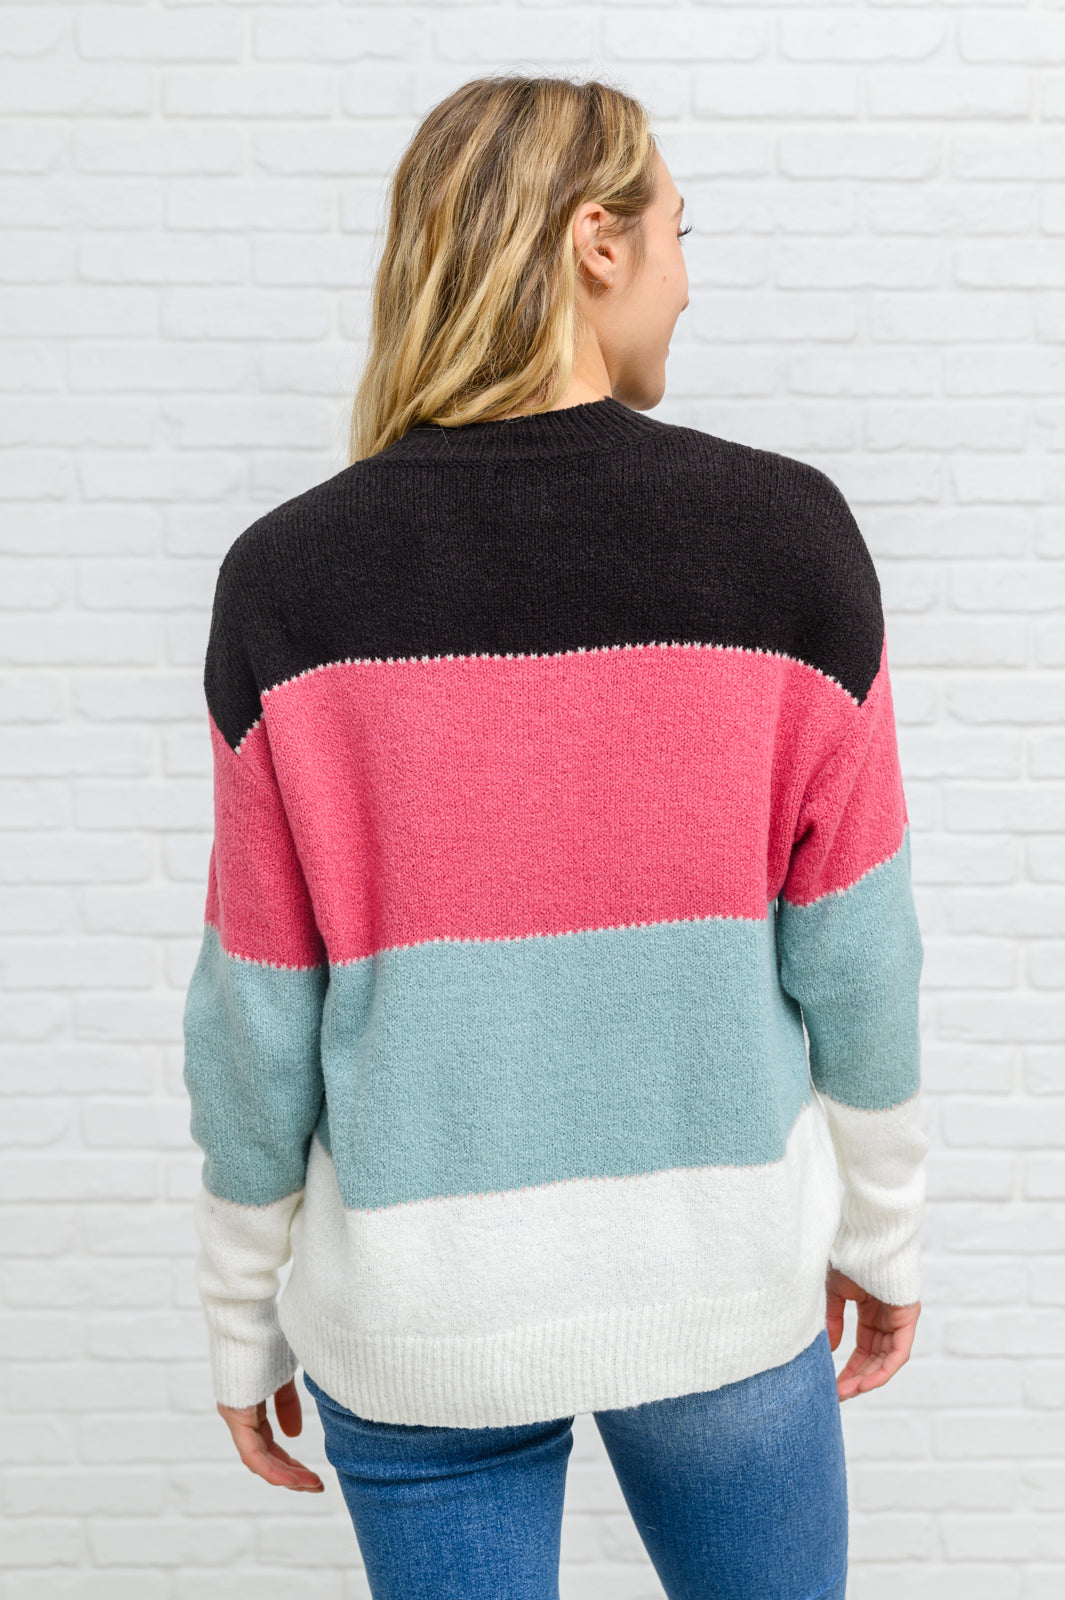 Bring the Vision Color Blocked Knit Sweater   